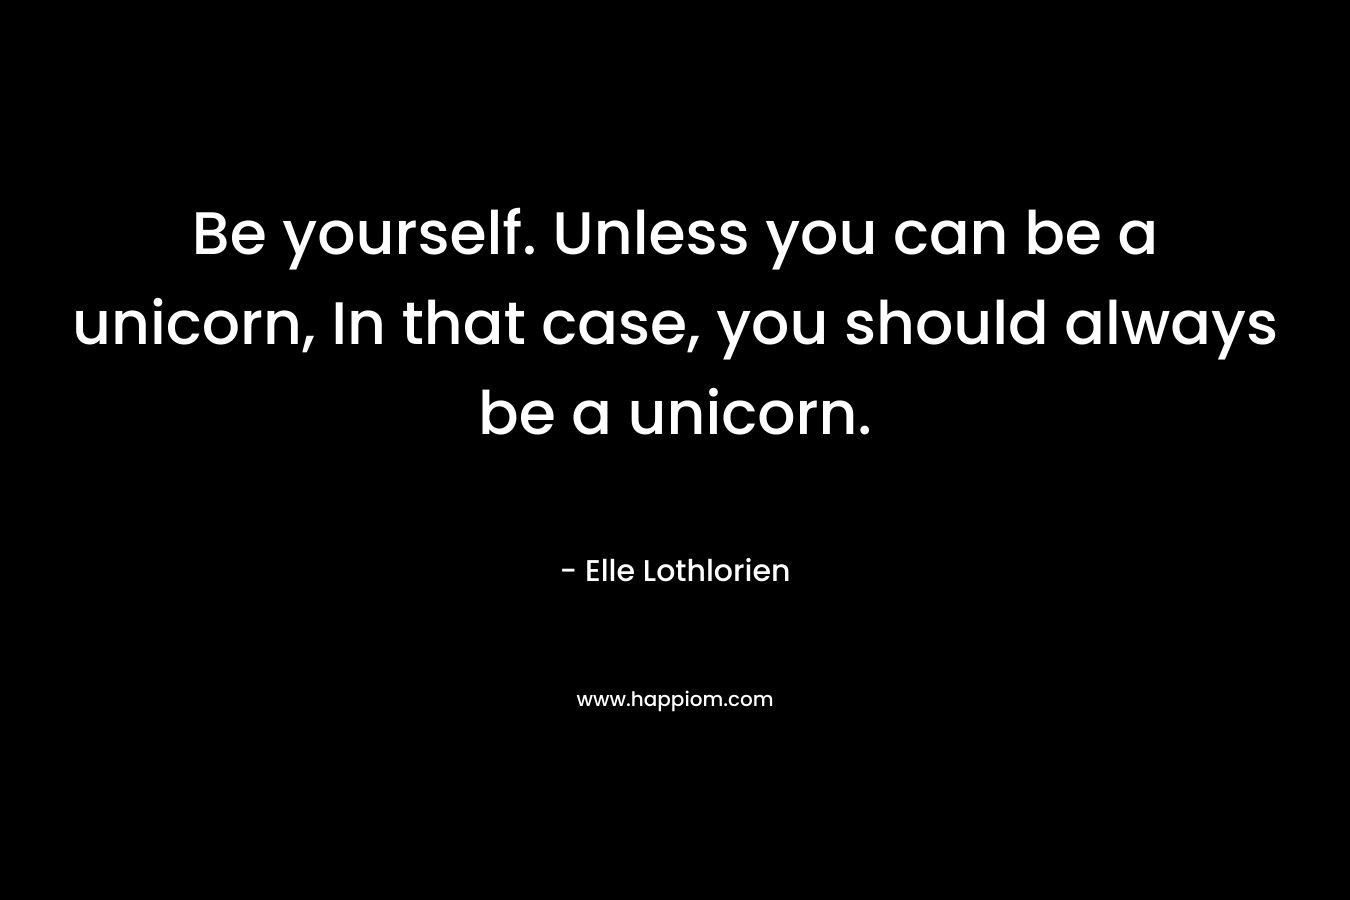 Be yourself. Unless you can be a unicorn, In that case, you should always be a unicorn.